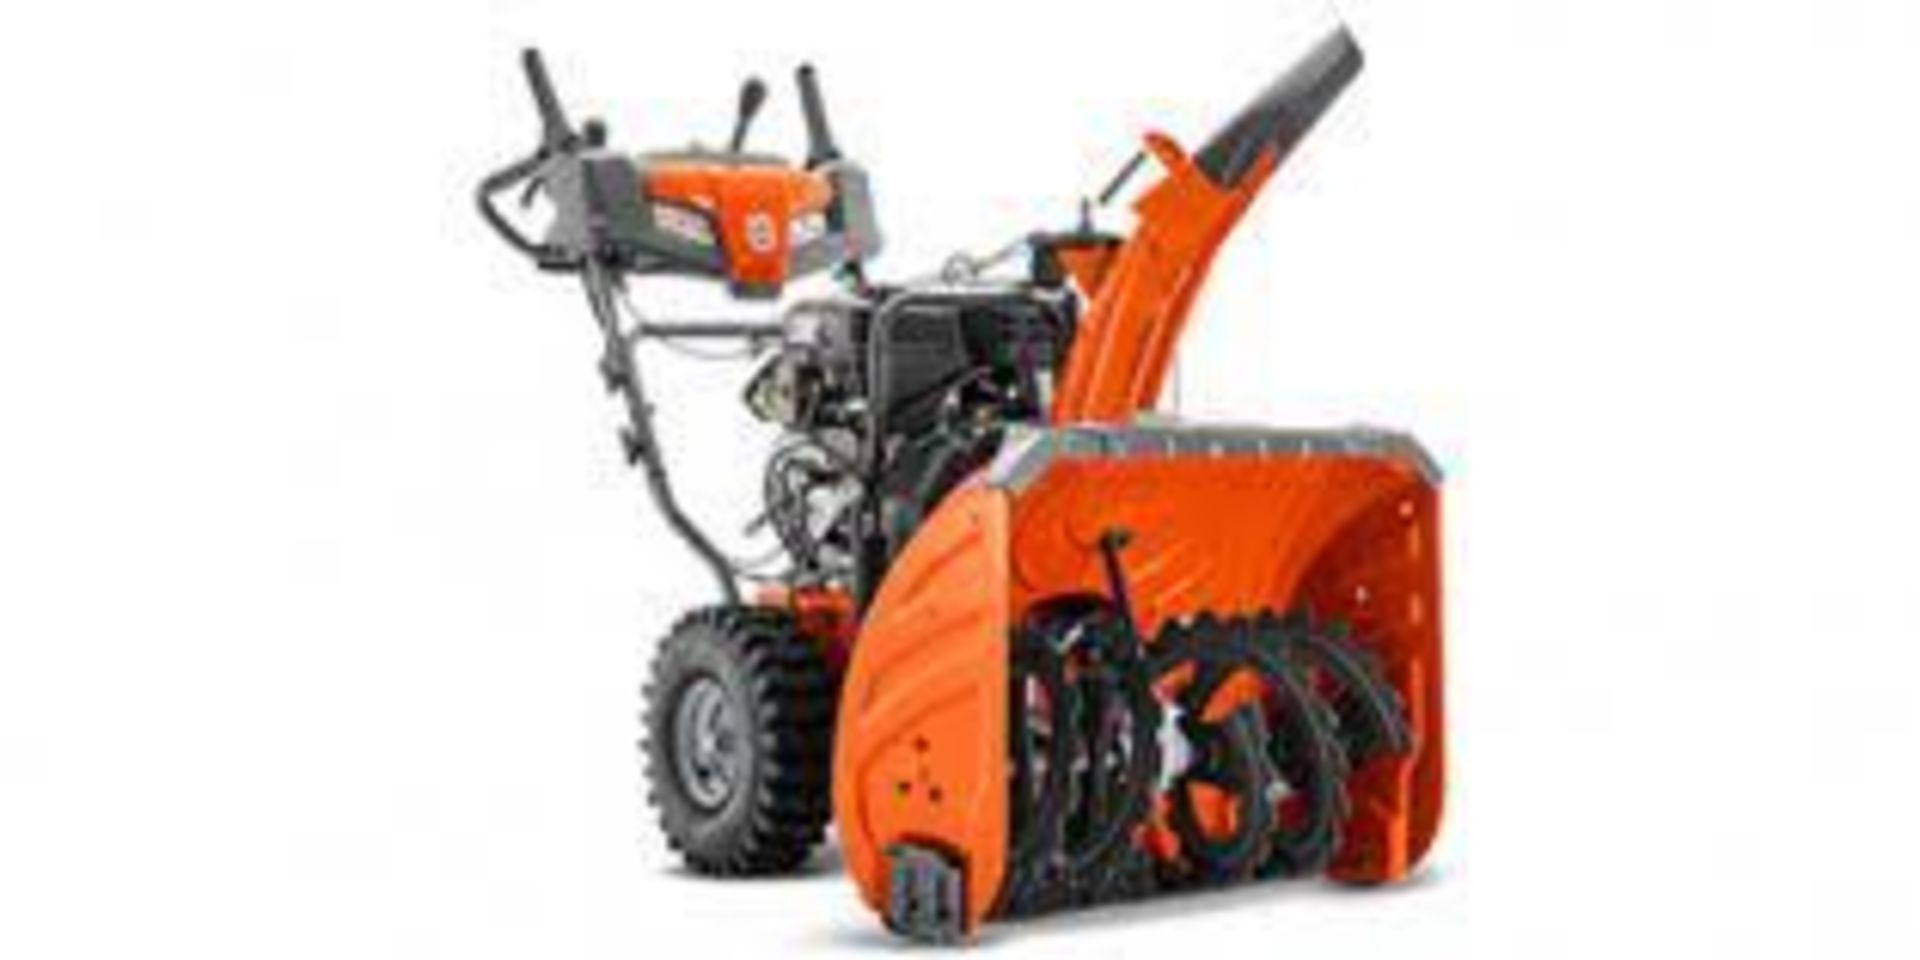 Husqvarna ST 324 Self Propelled Snow Blower - Approx. MSRP $1299 - Image 2 of 5